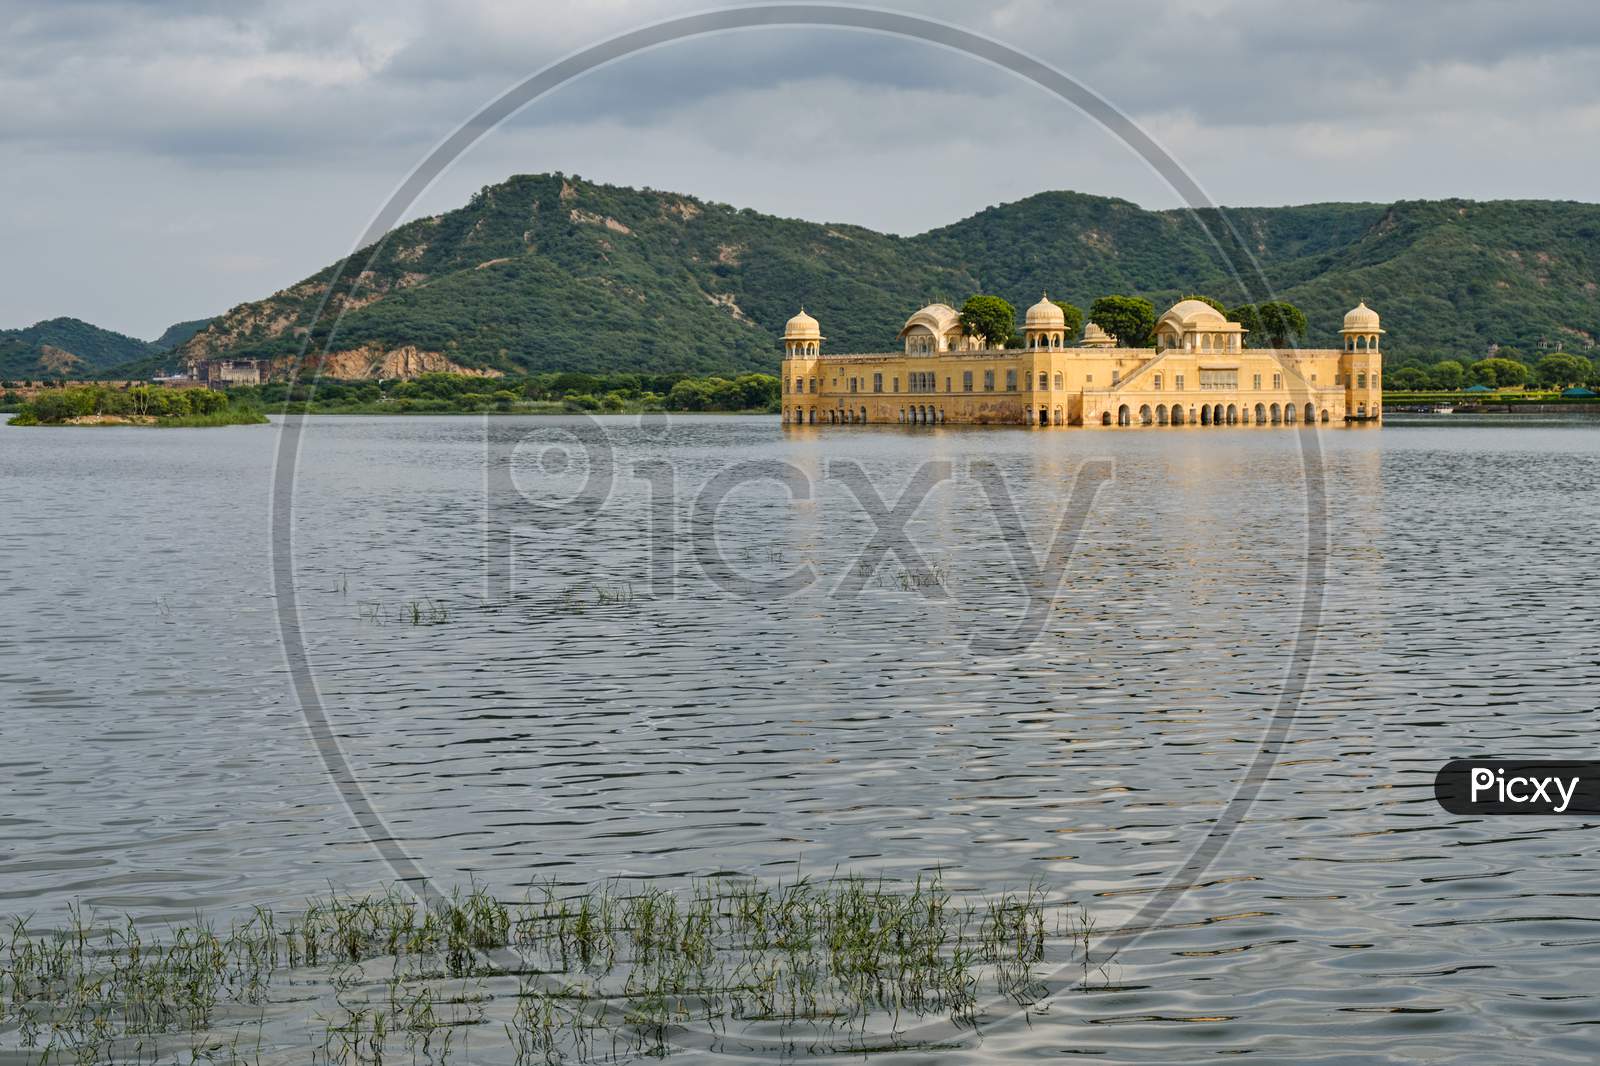 Jal Mahal (Water Palace) In The Middle Of The Man Sagar Lake In Jaipur, Rajasthan, India